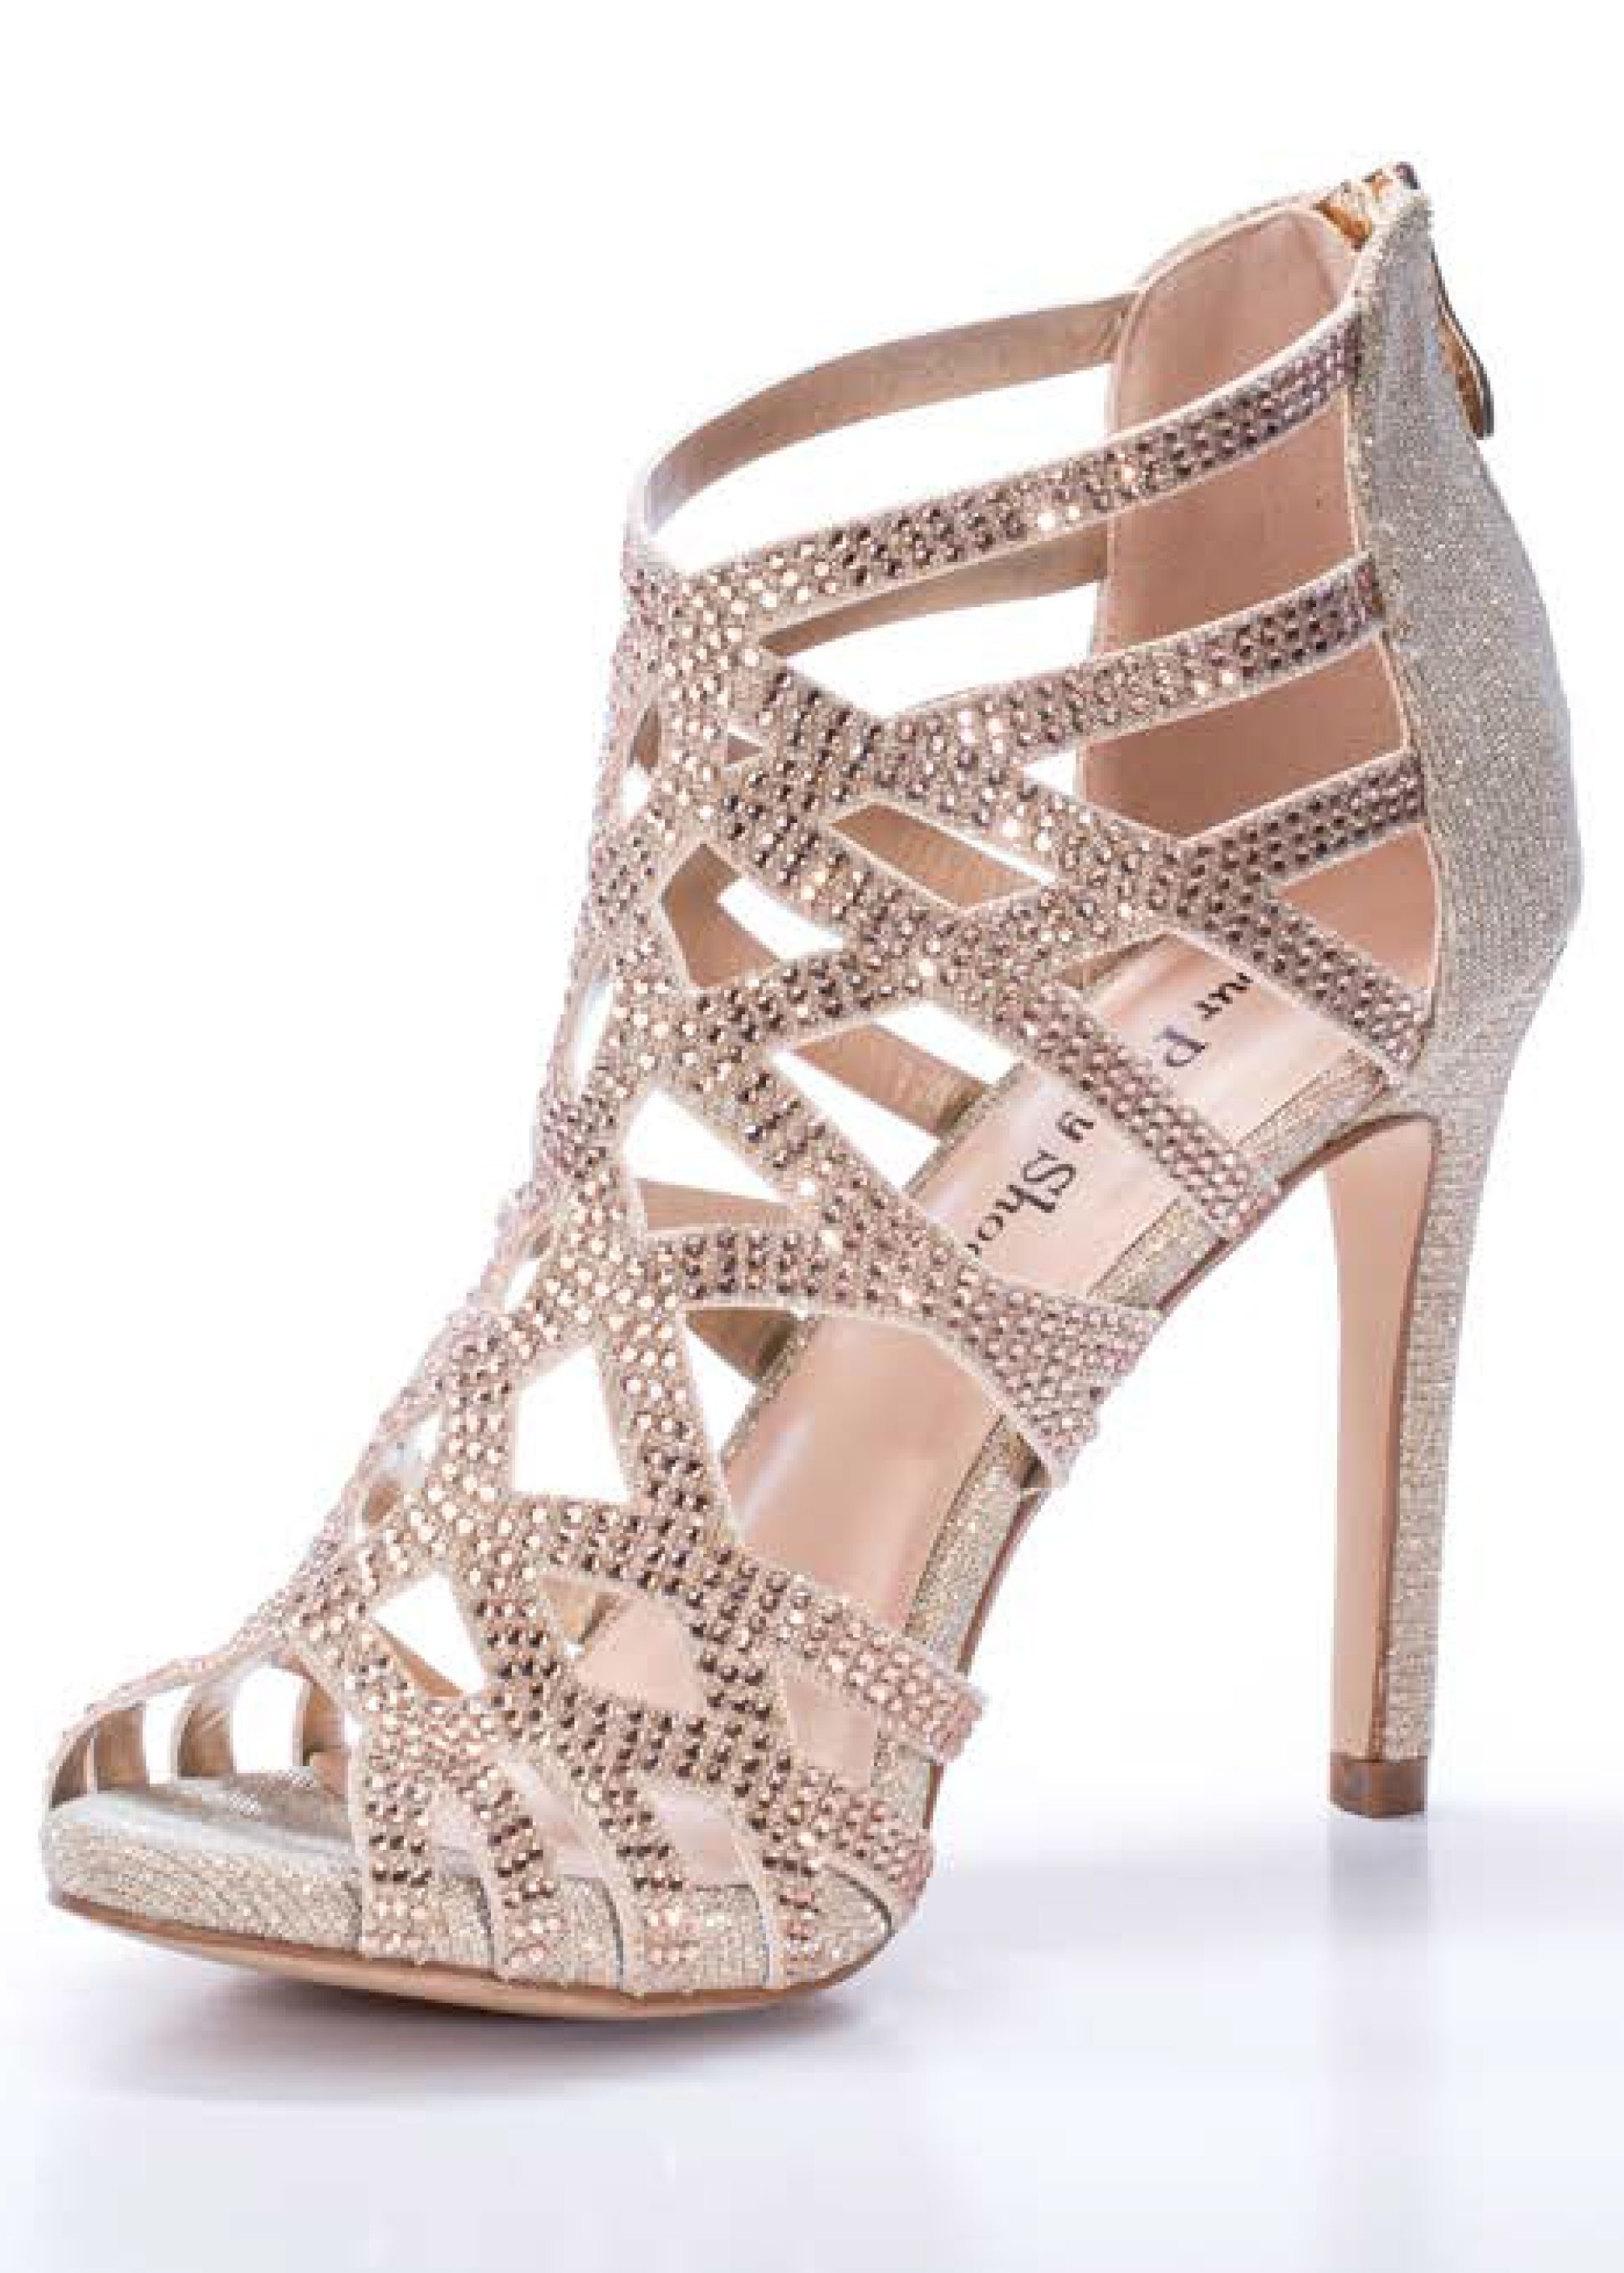 Your Party Shoes Pandora Jeweled Sandal Rose Gold 1014 | RissyRoos.com